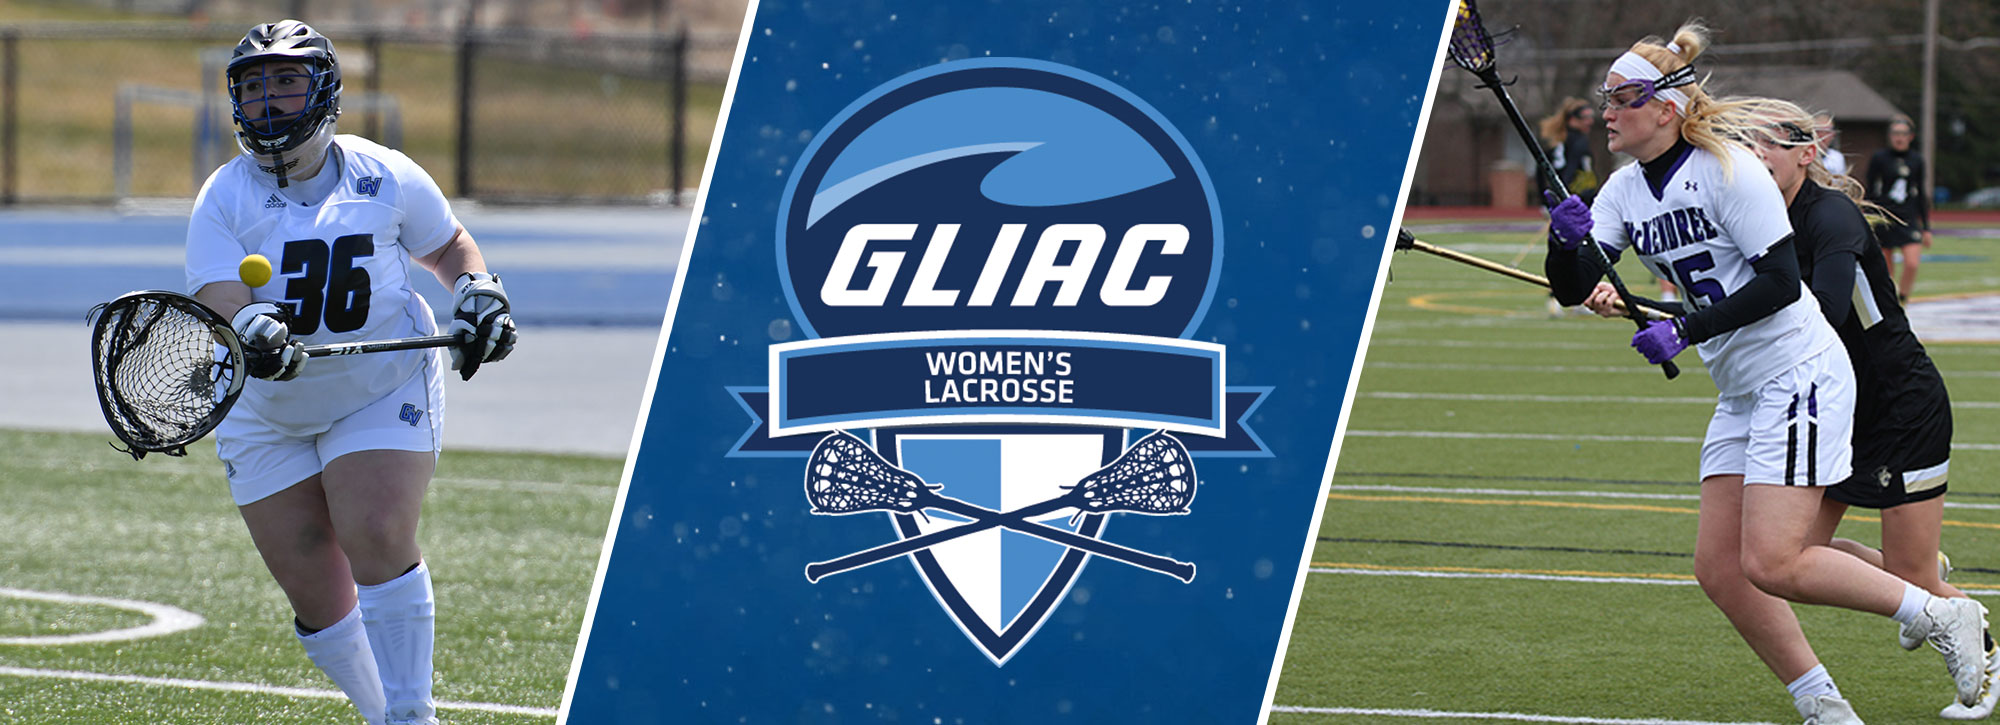 GVSU's DeMilia, McKendree's Salthouse Selected GLIAC Lacrosse Players of the Week